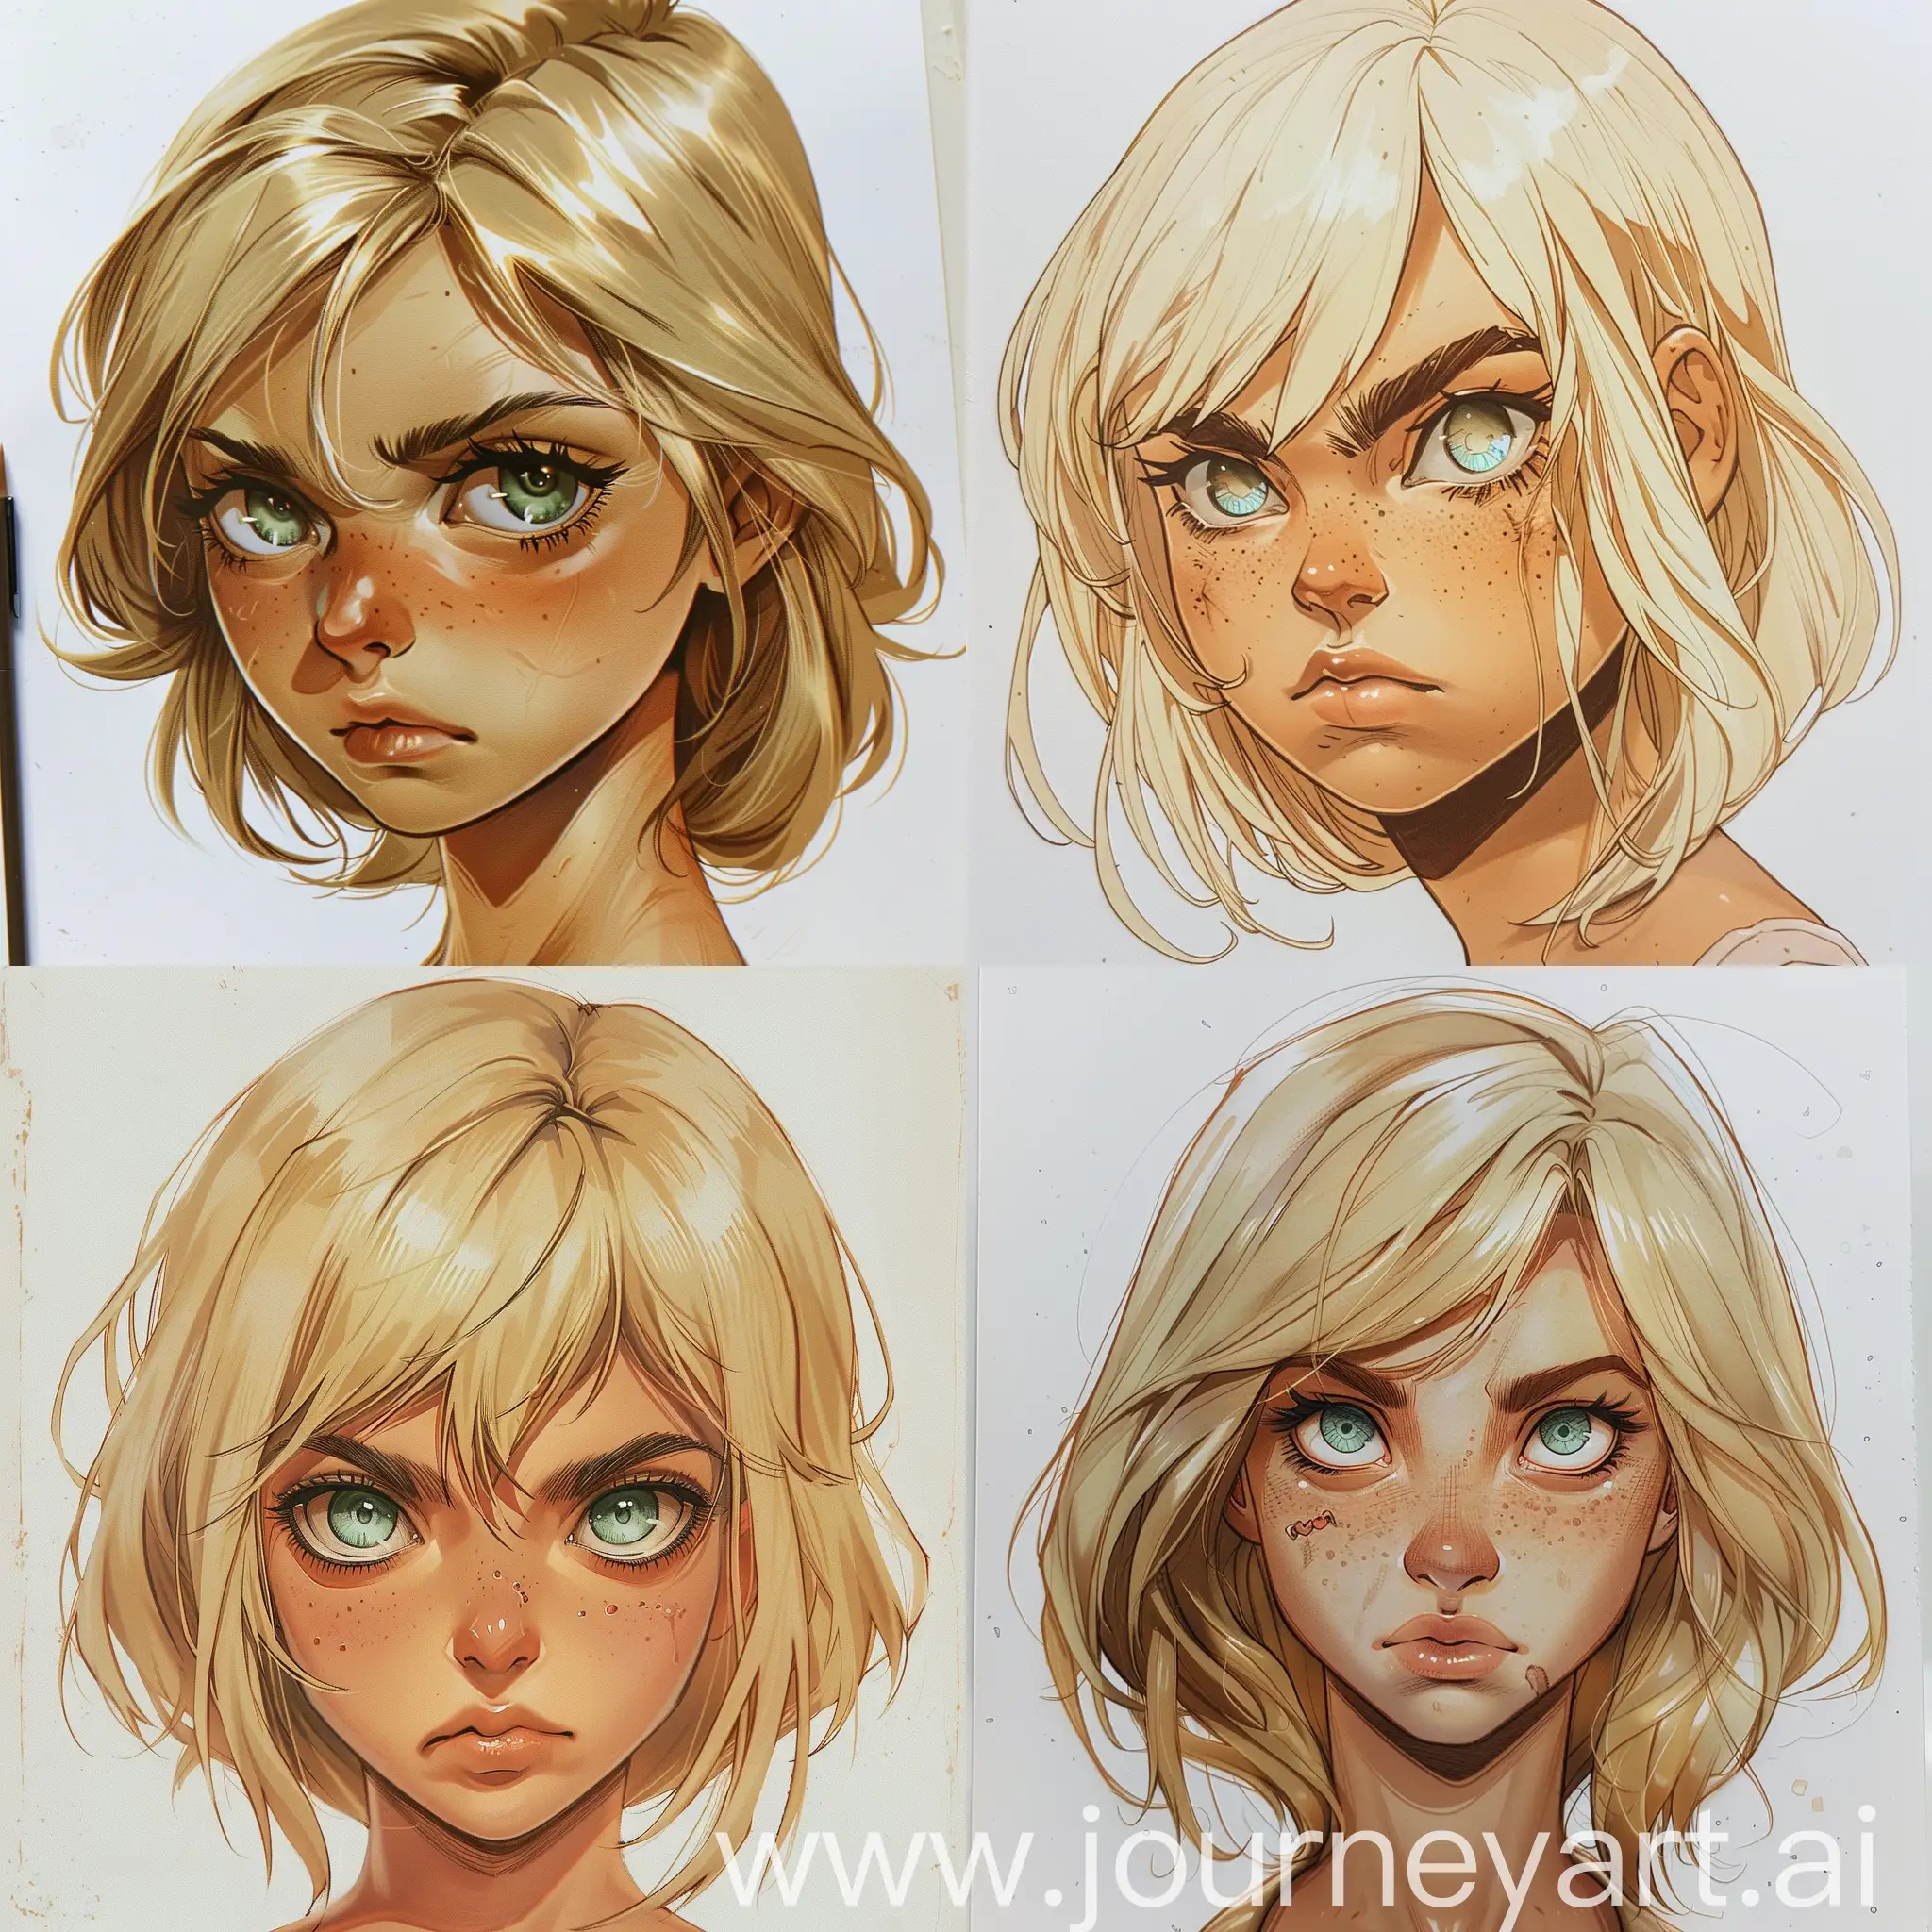 Fierce-Blonde-Girl-Character-Design-in-Muted-Pastel-Colors